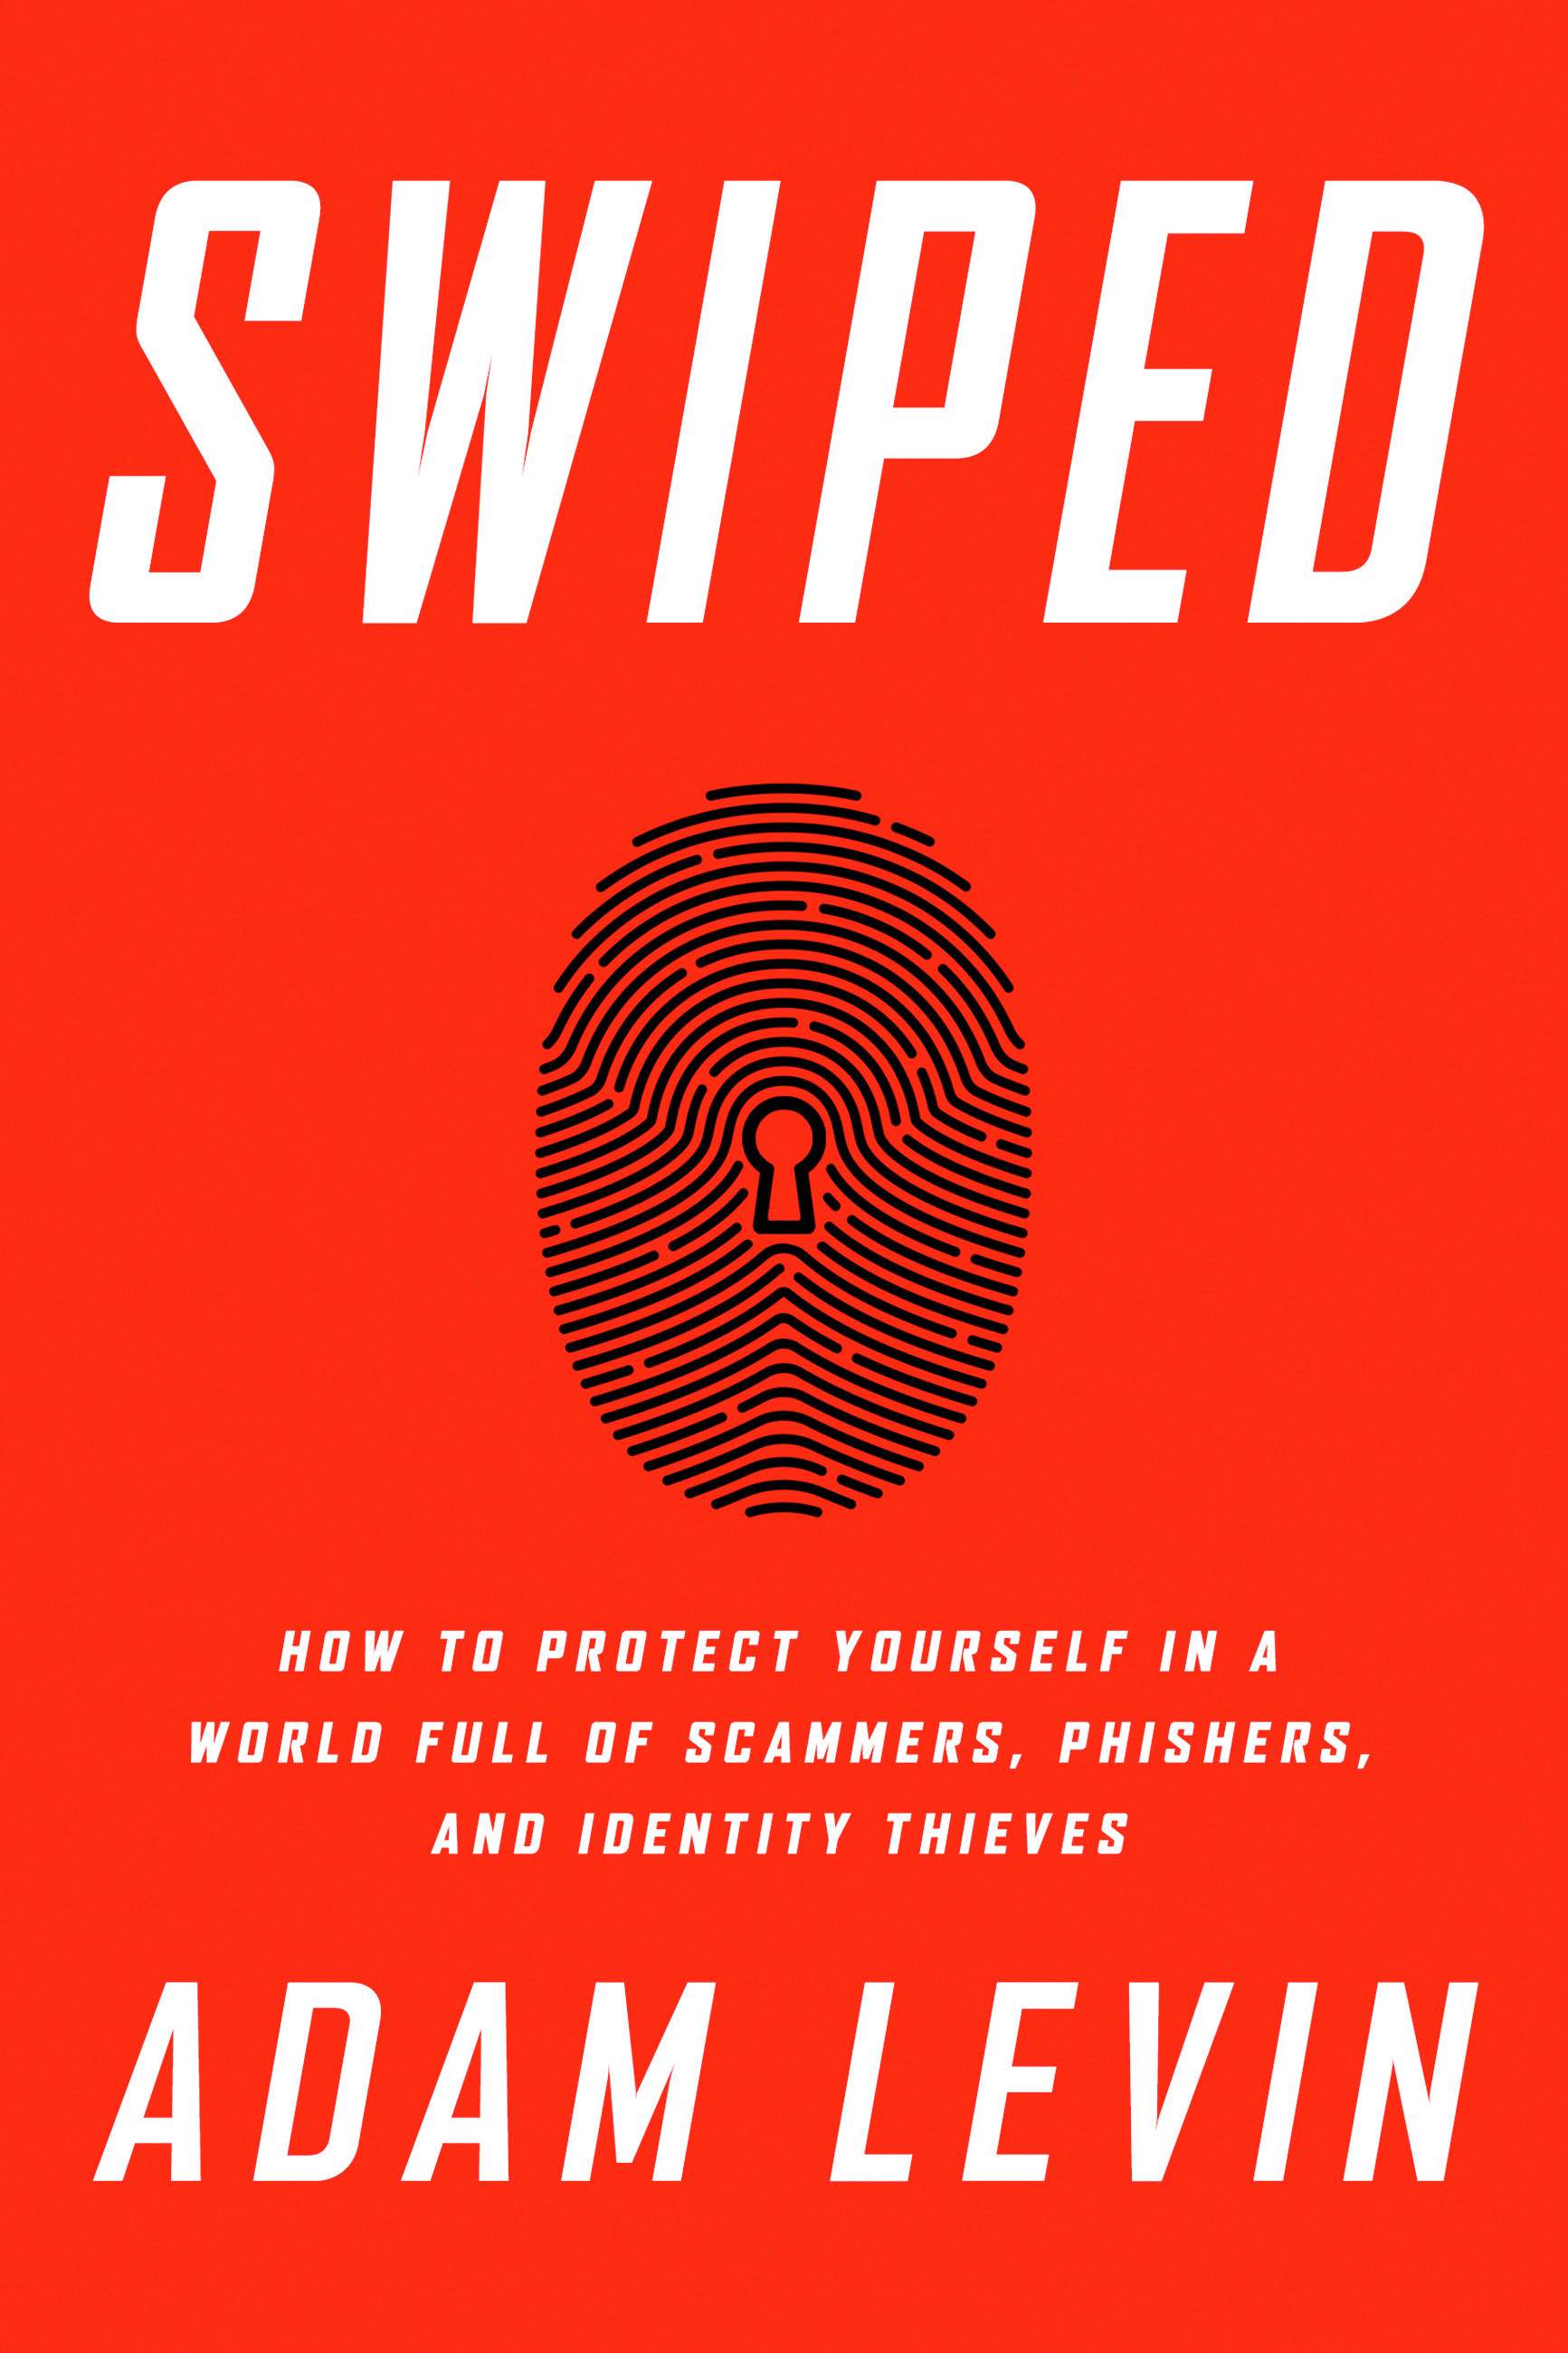 Swiped book review